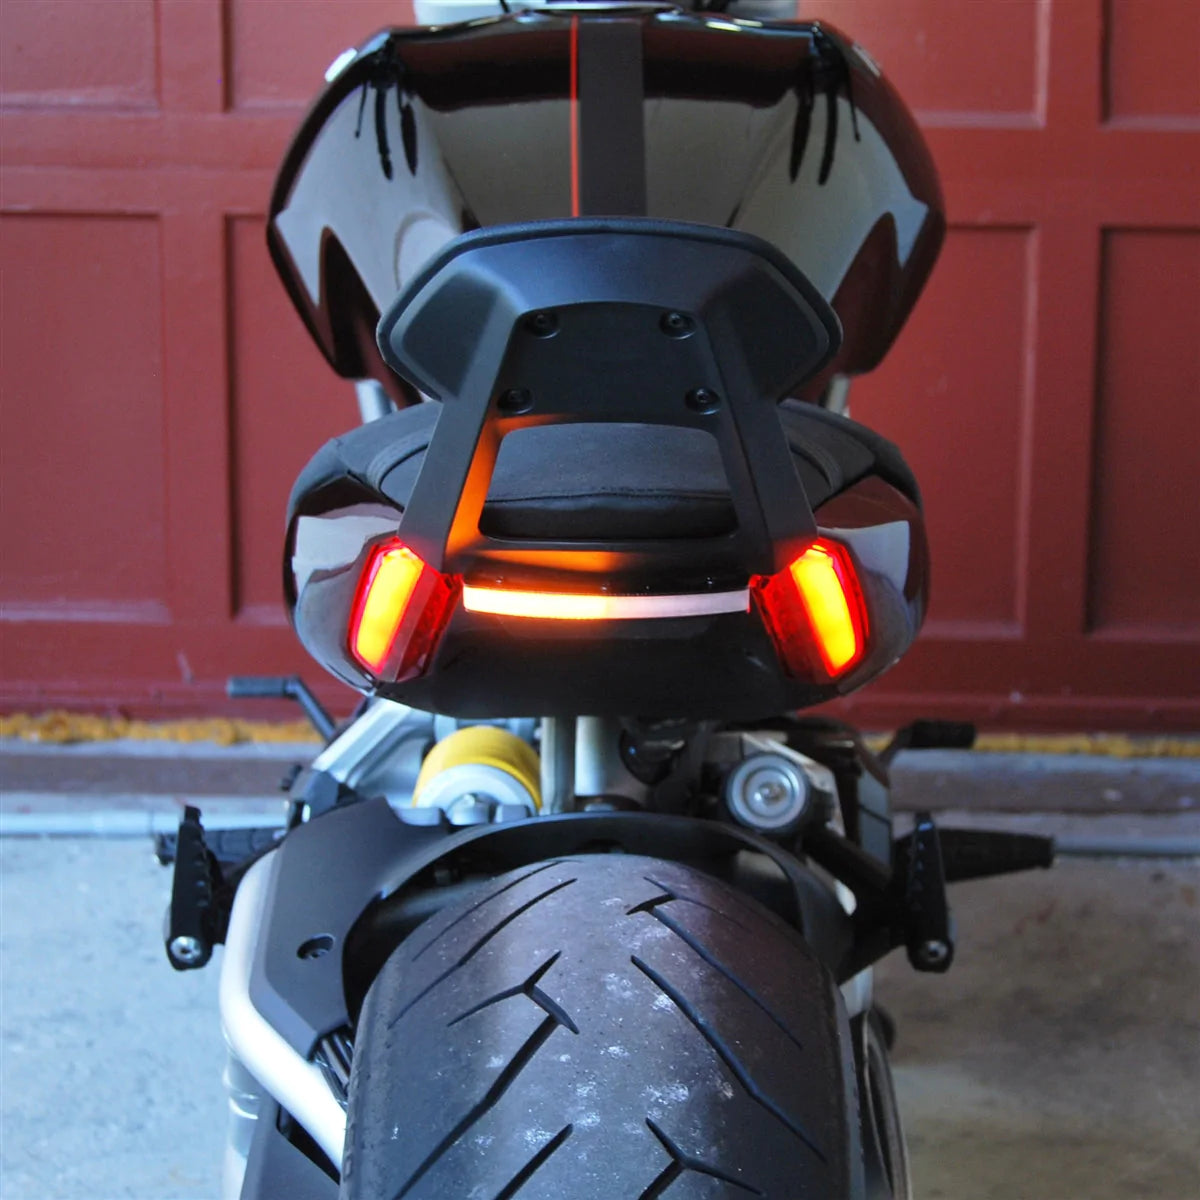 Ducati XDiavel Rear Turn Signals (Backrest Compatible) Instructions